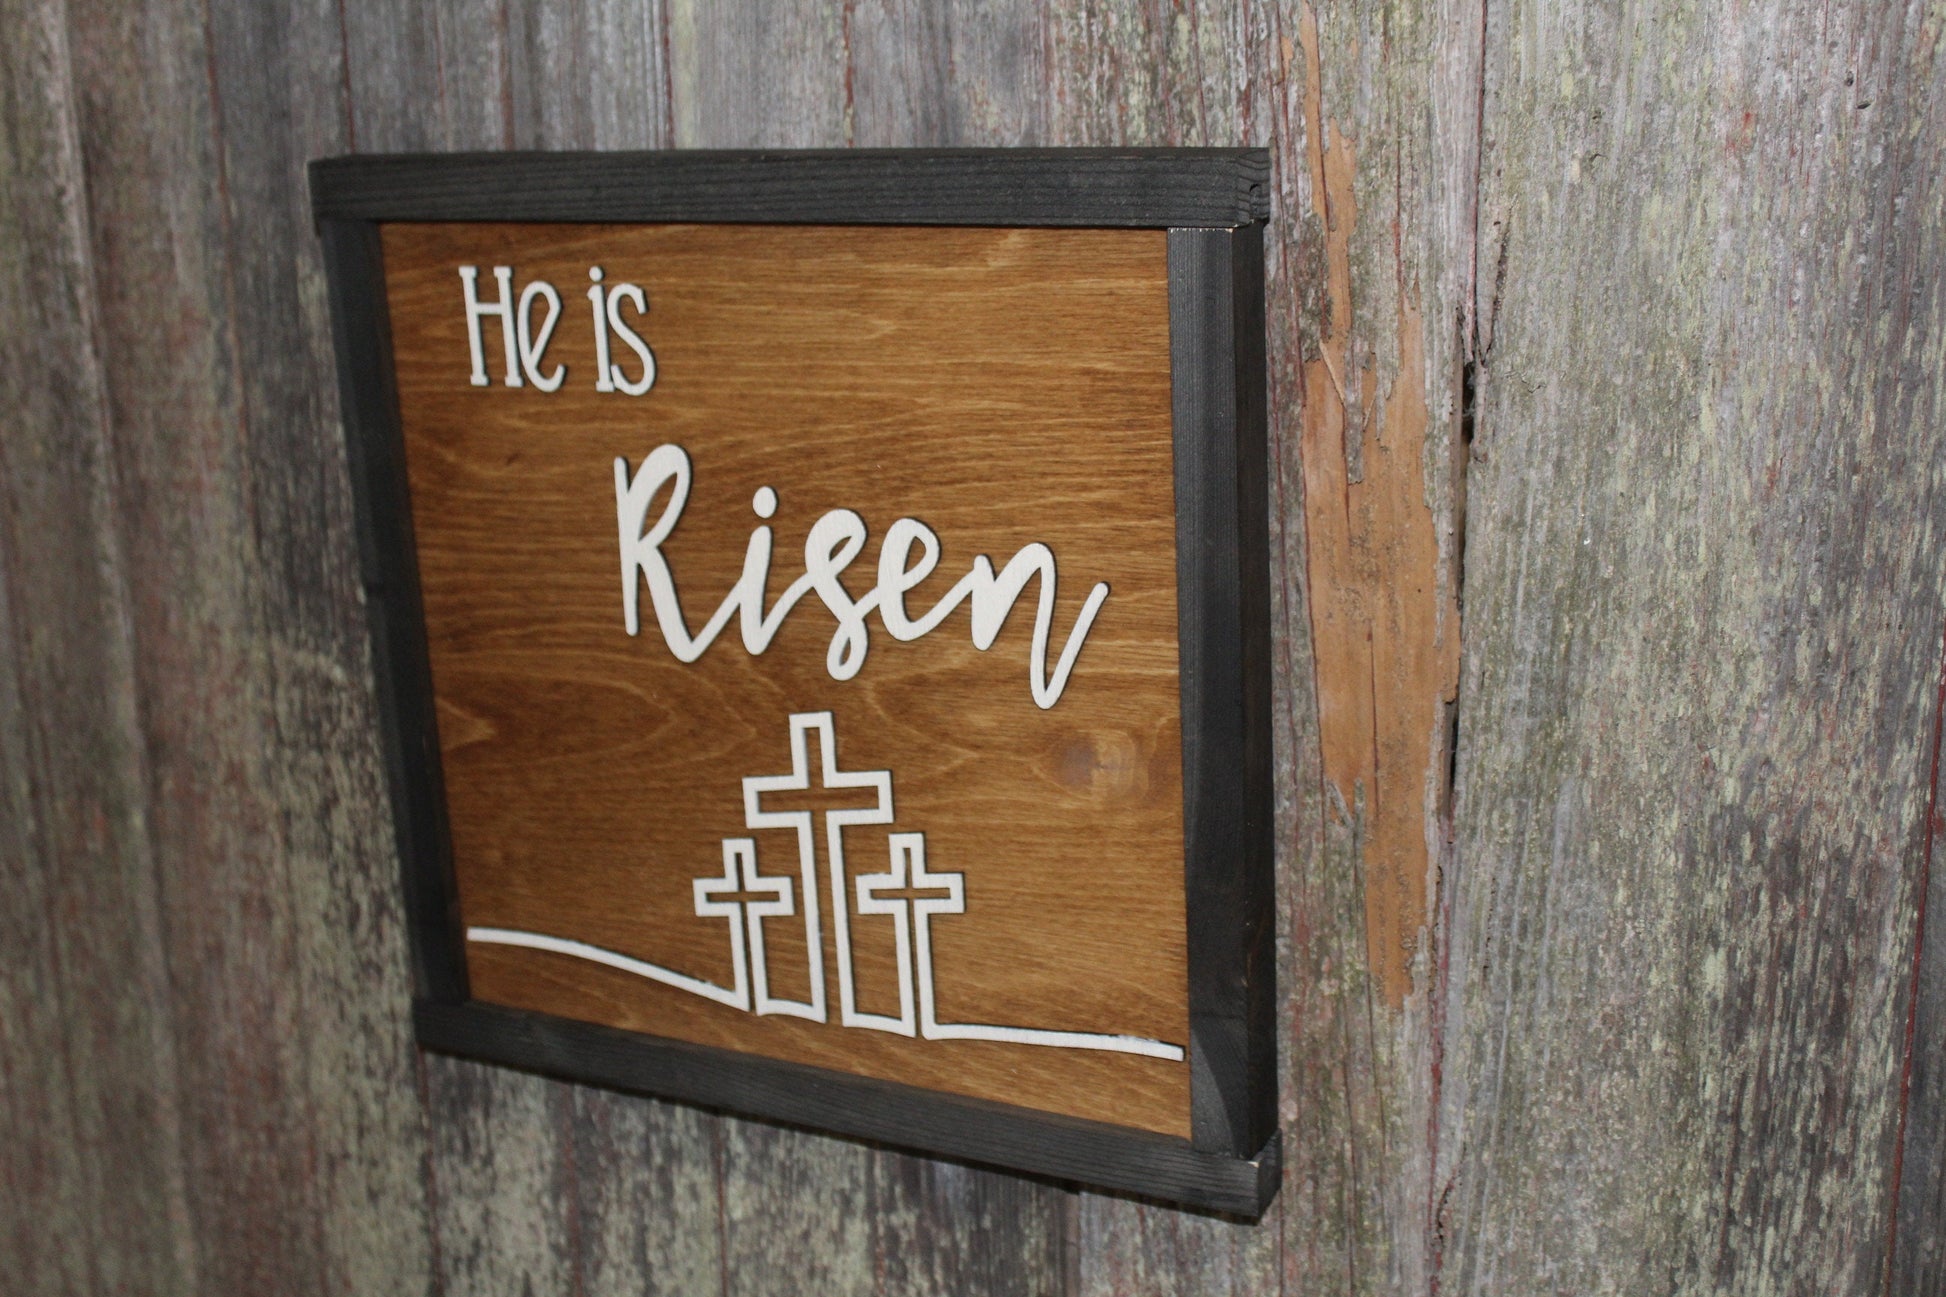 He Is Risen Easter Celebration Wood Sign 3D Raised Text 3 Crosses Rustic Jesus Lives Primitive Decor Wall Hanging Spring Resurrection Day